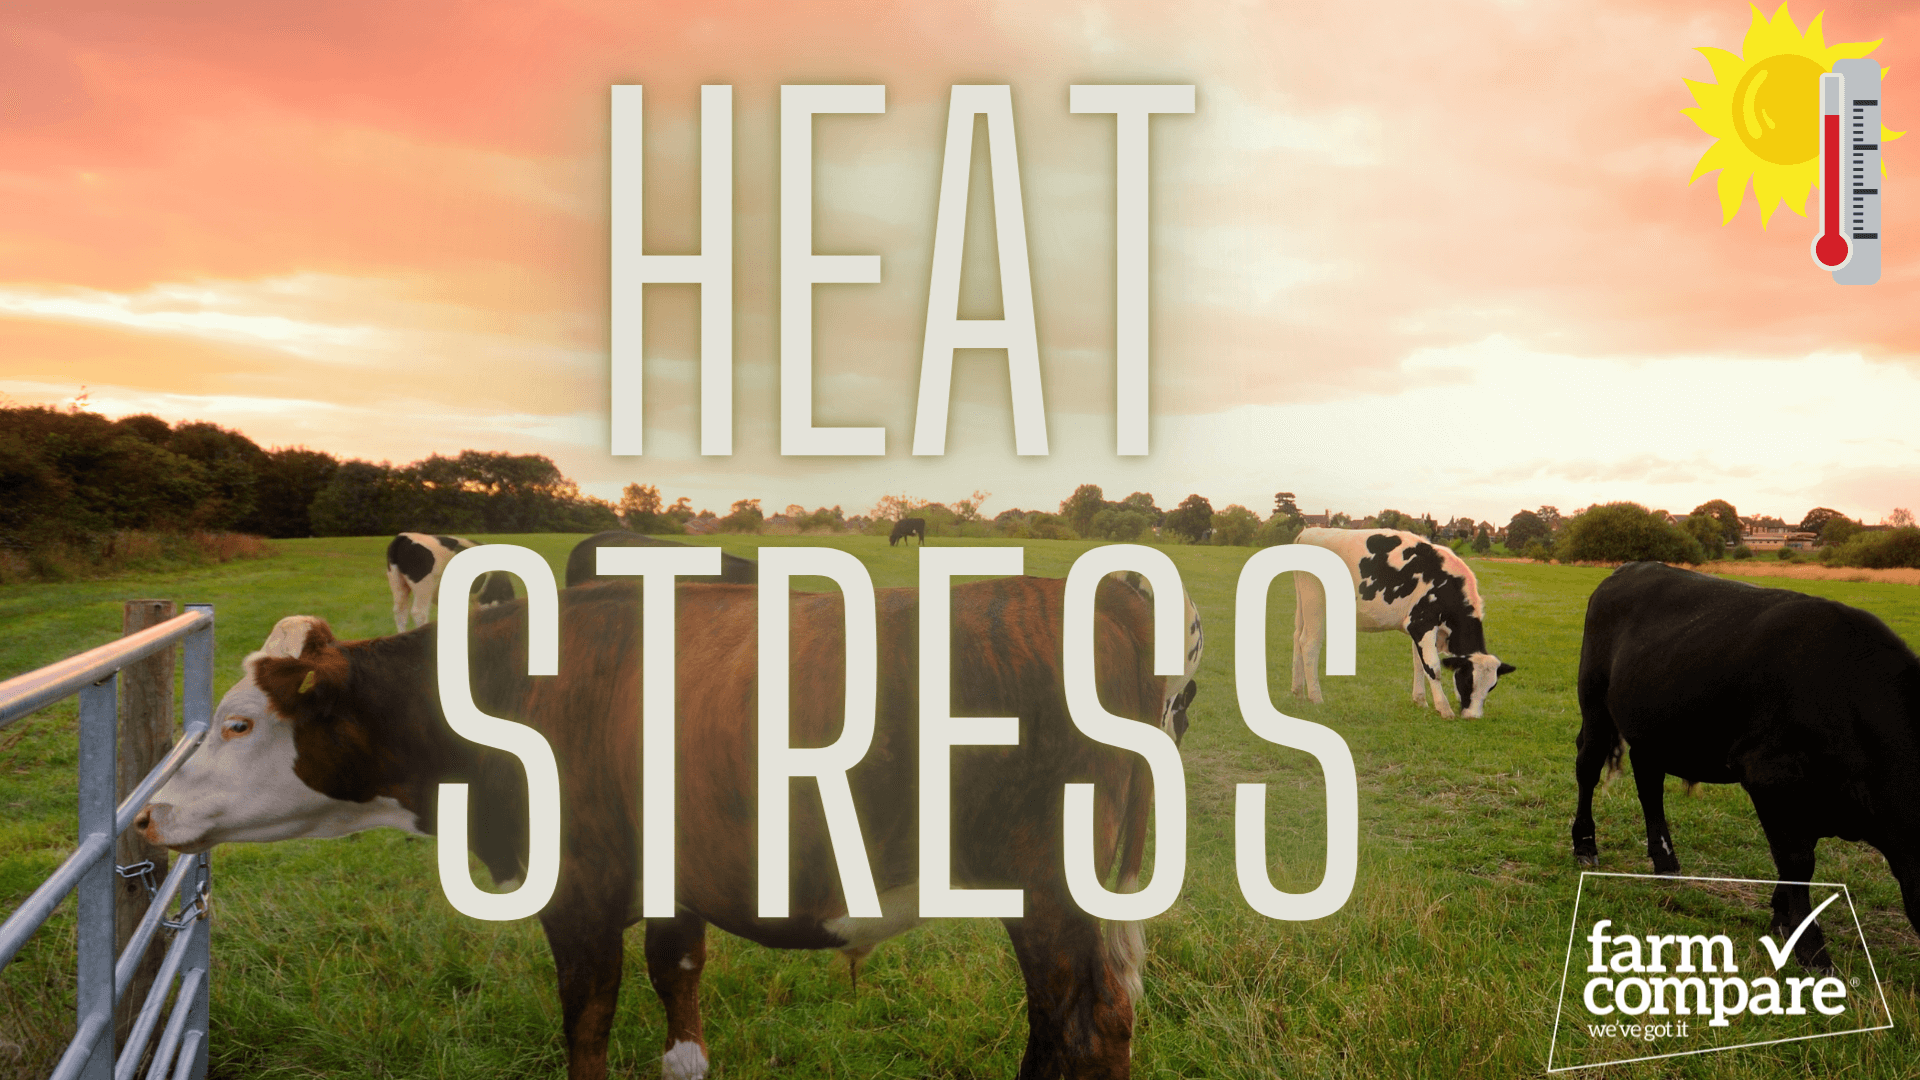 How to prevent heat stress in livestock